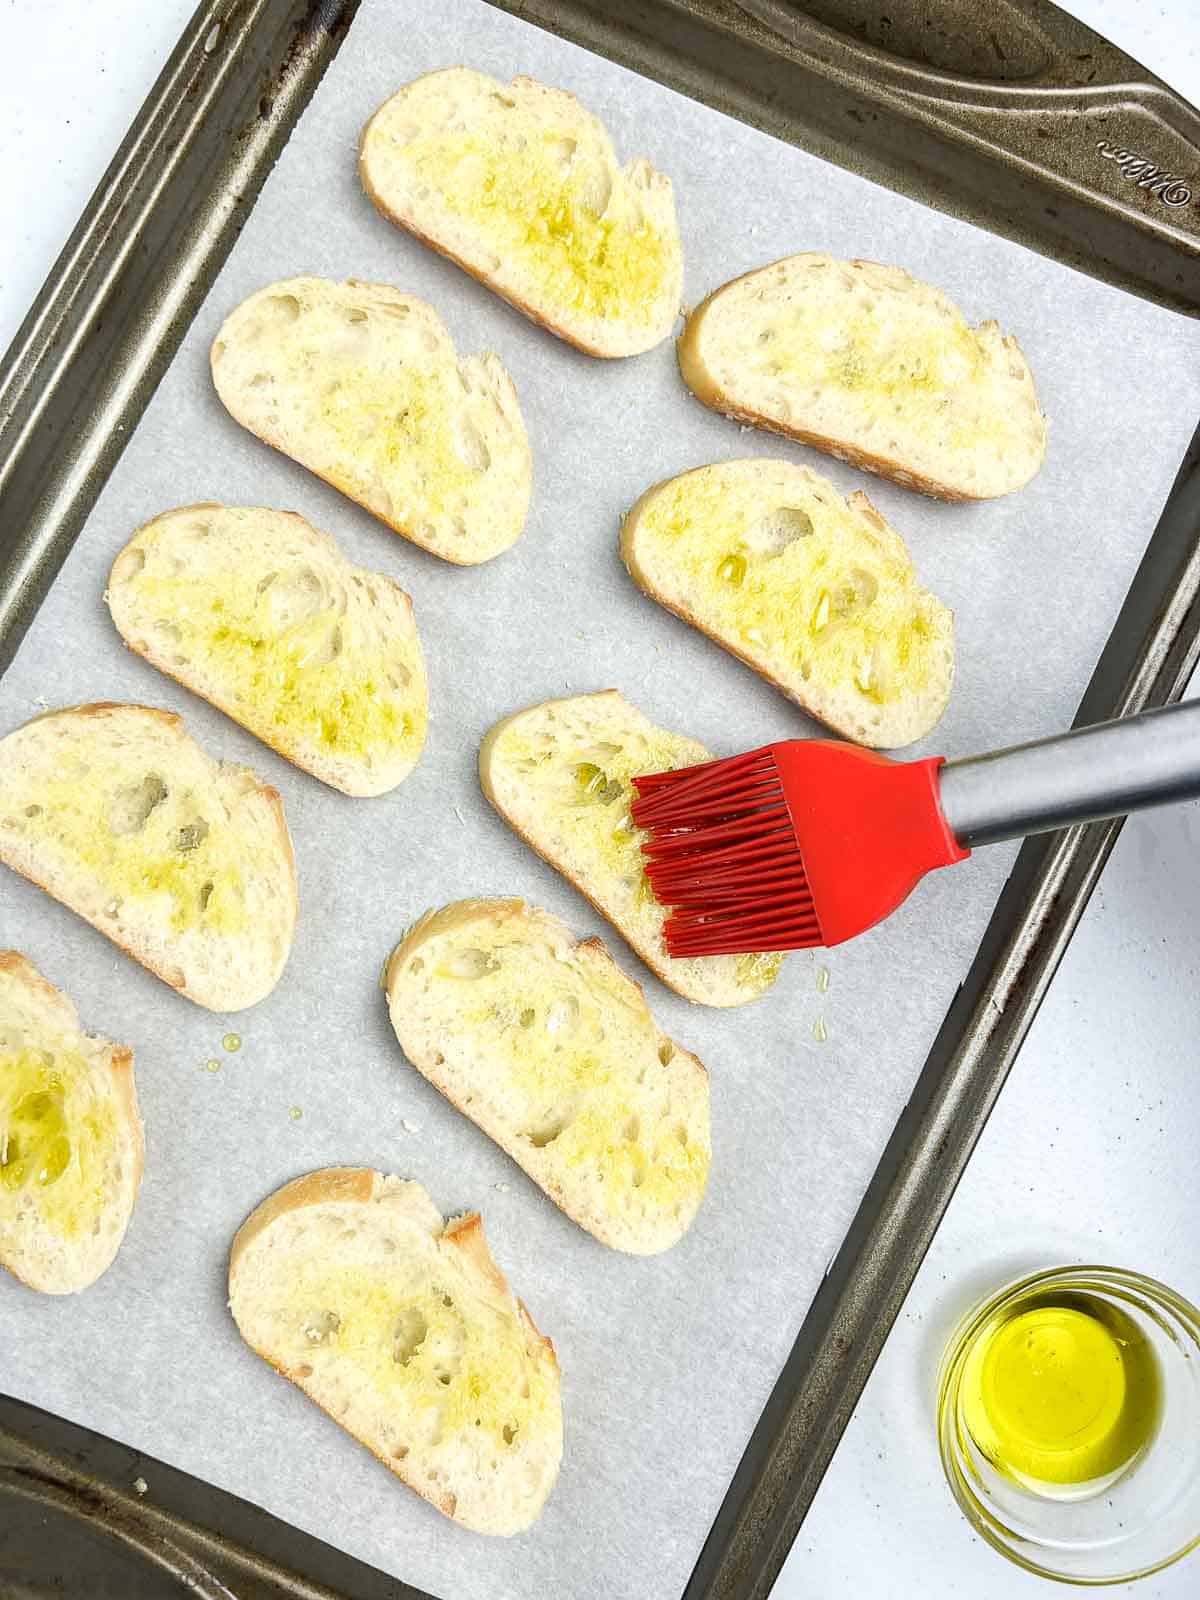 A brush with olive oil and a baking pan of baguette slices.